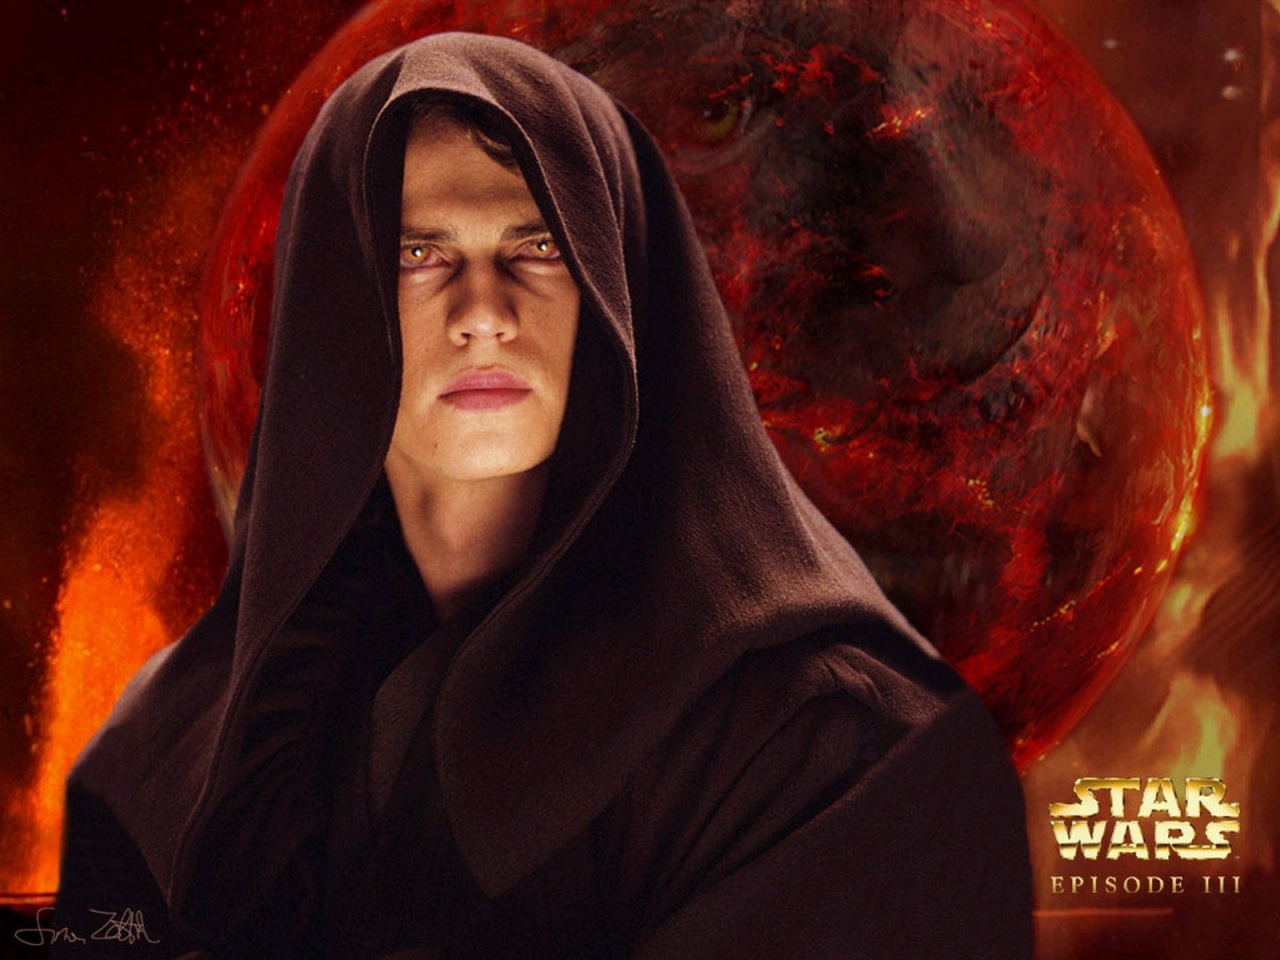 Star Wars Episode III: Revenge of the Sith Picture